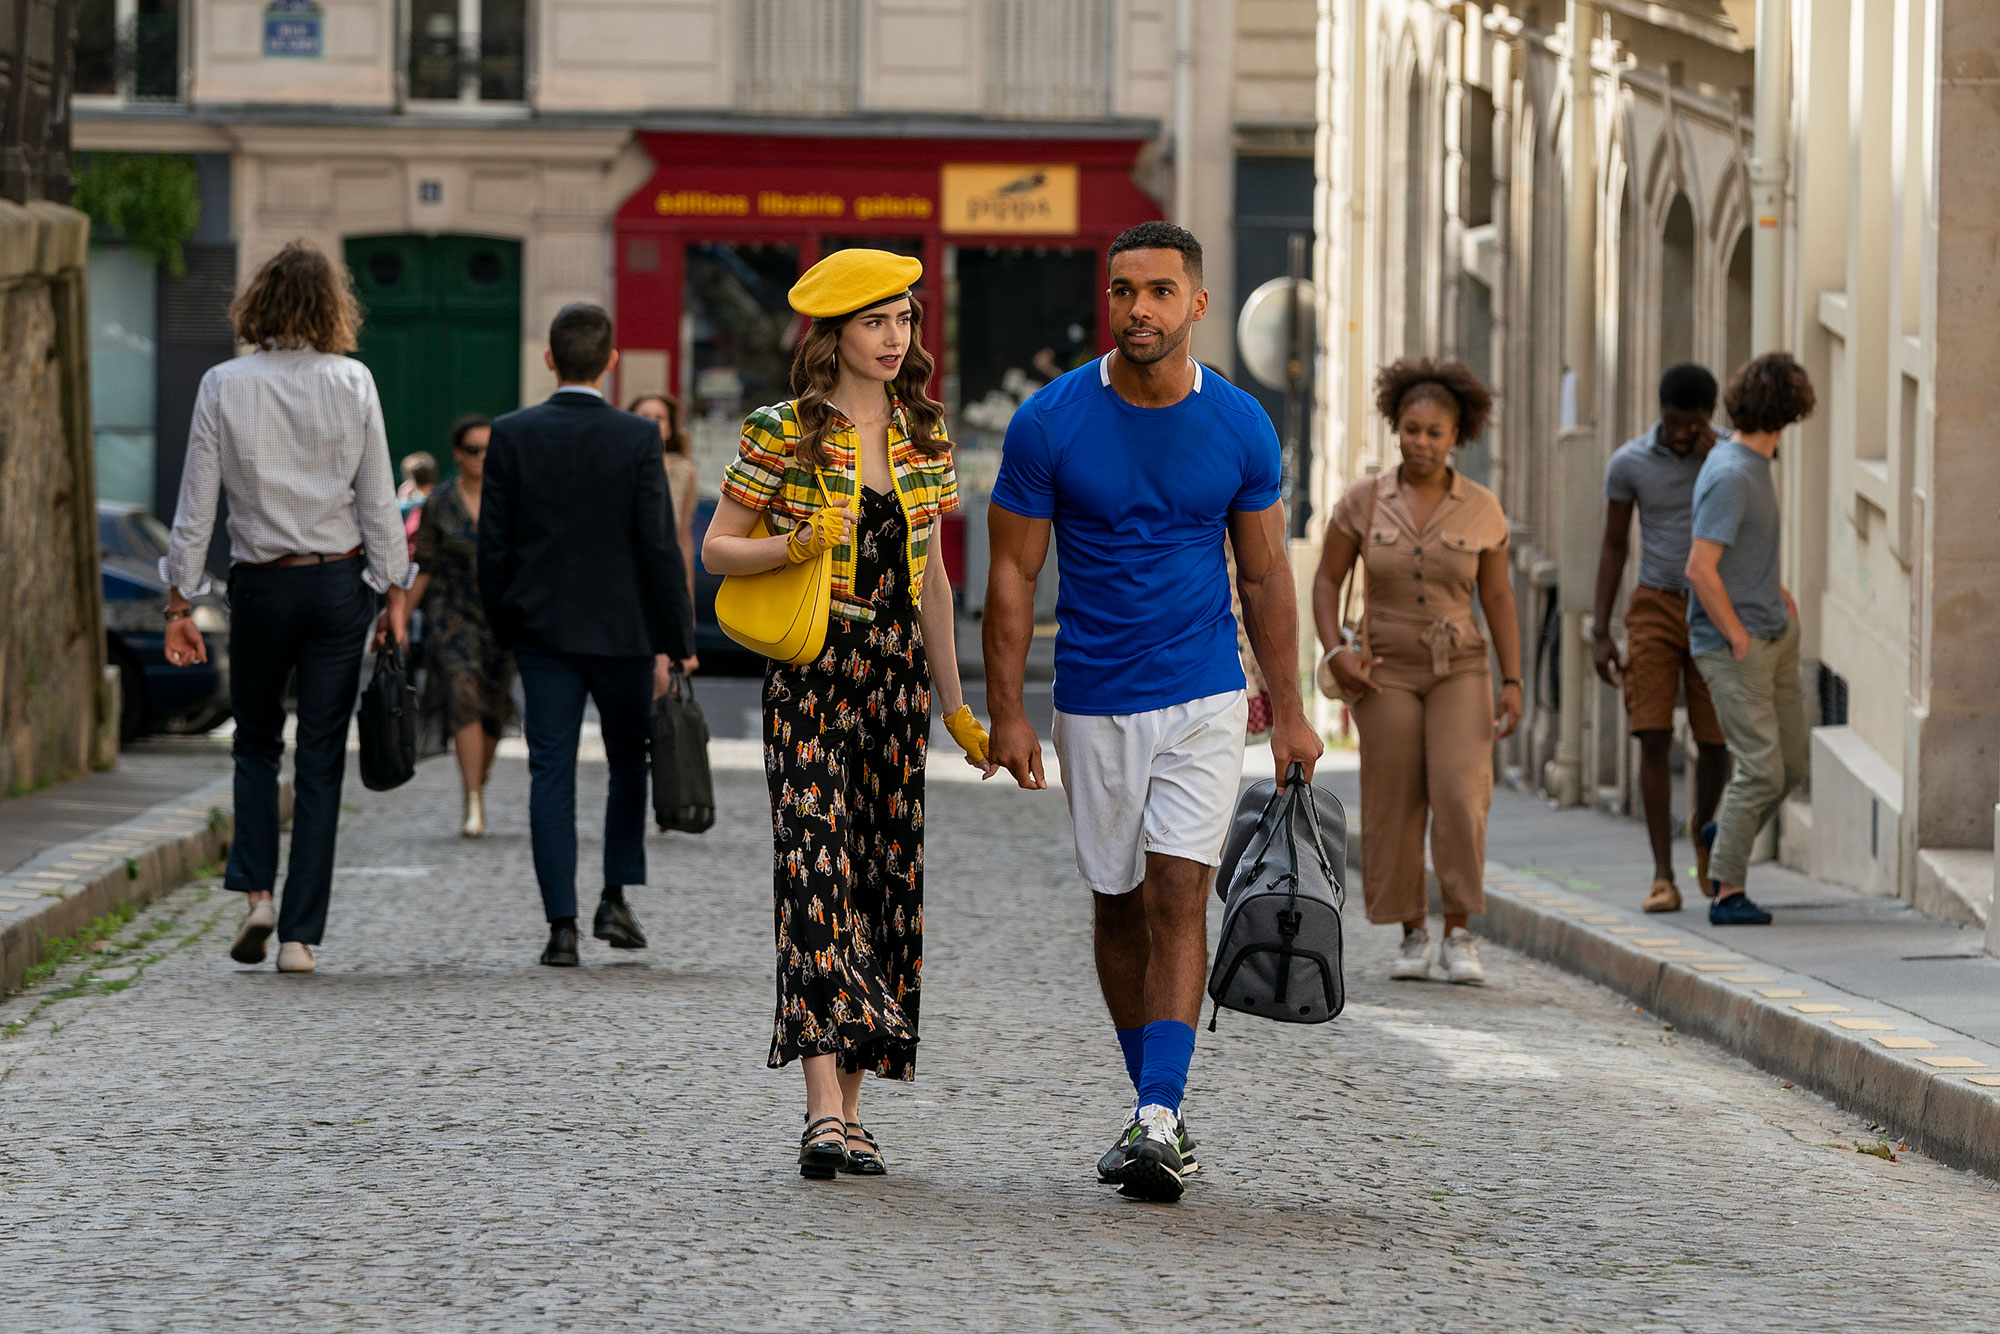 Emily in Paris Season 2: Our Favorite Looks and Where to Get Them